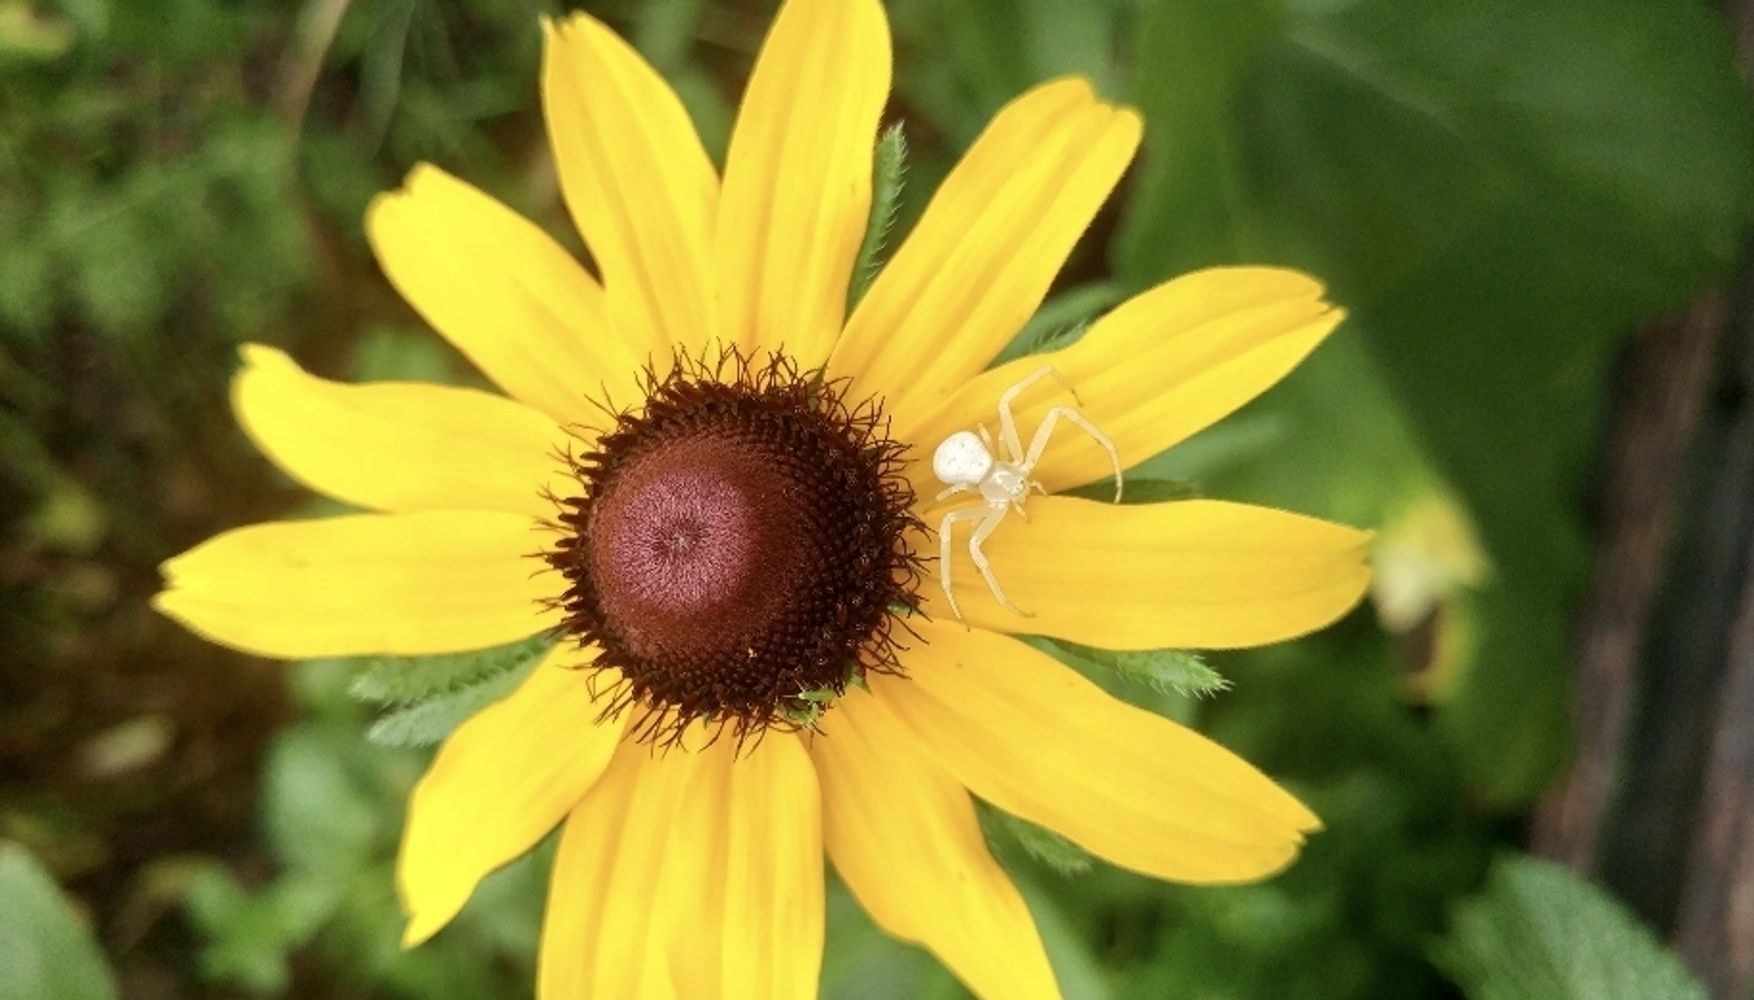 Black eyed susan with white spider on its yellow petals